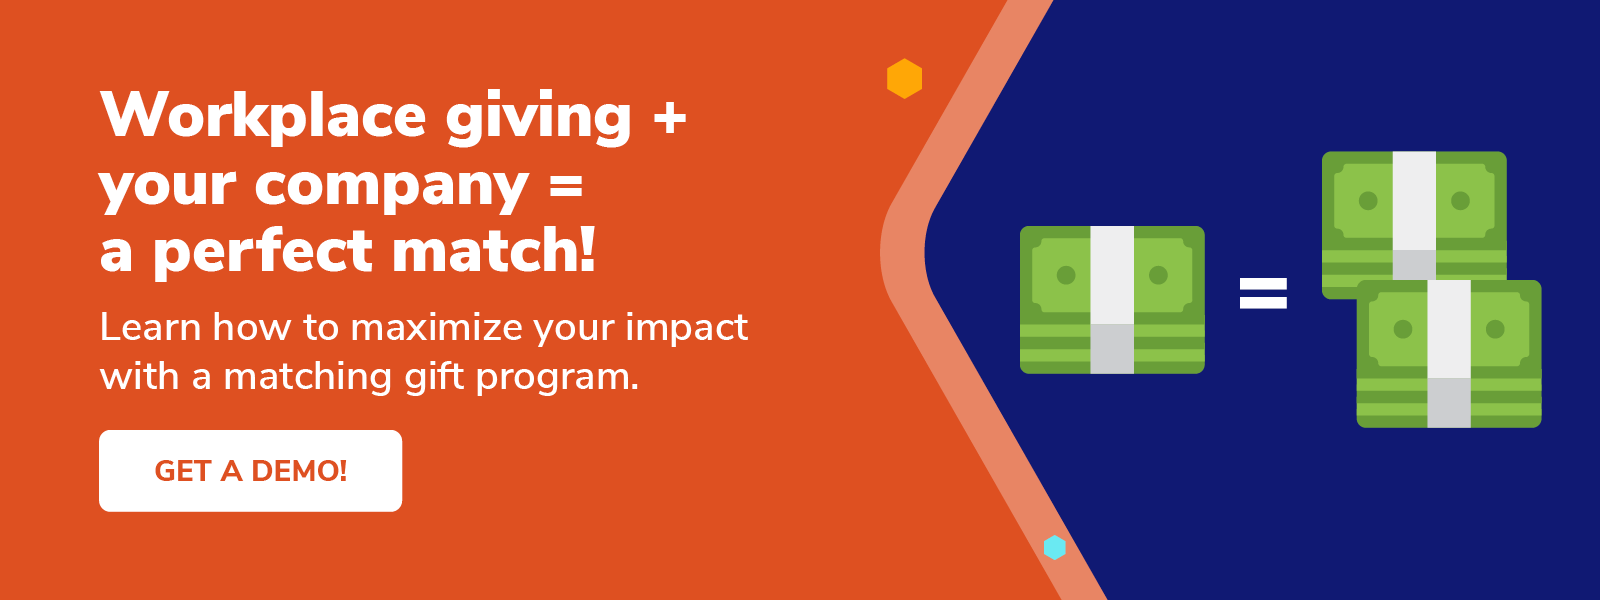 Click this graphic to get a demo of Double the Donation’s matching gift software, which you can use to facilitate your workplace giving program.